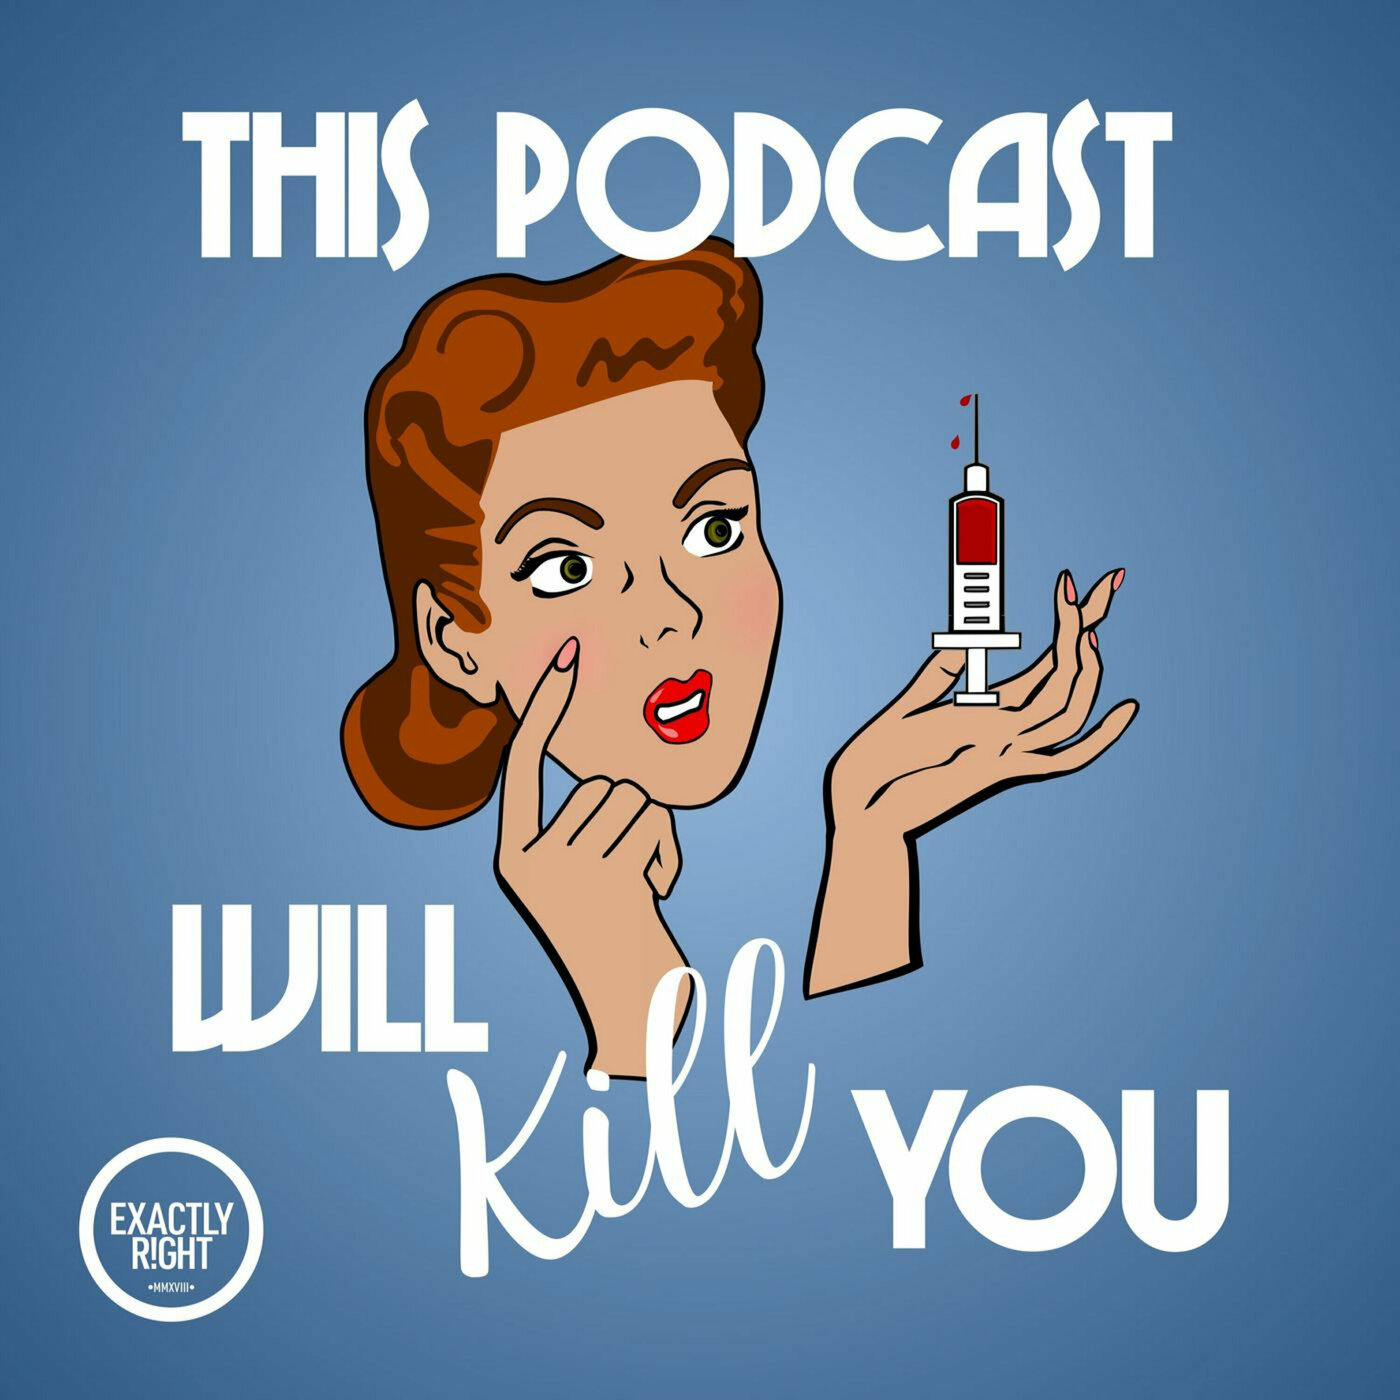 This Podcast Will Kill You podcast